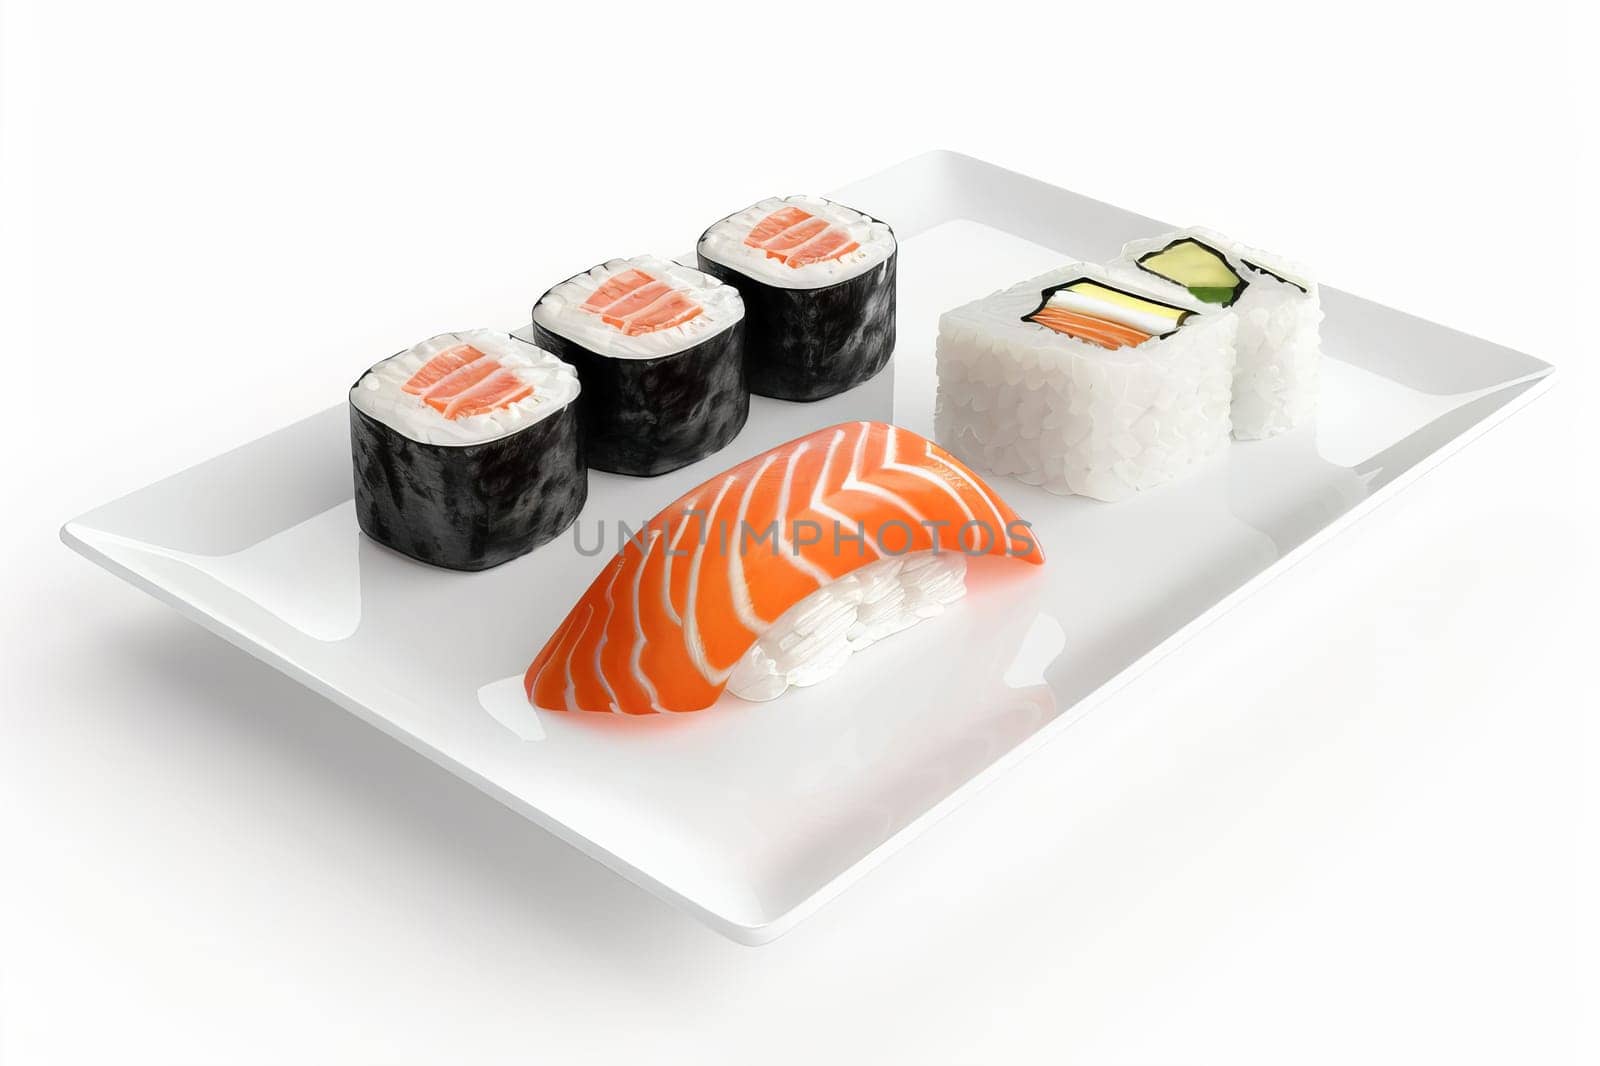 Several pieces of sushi on a white Japanese plate on a white background. Japanese food.